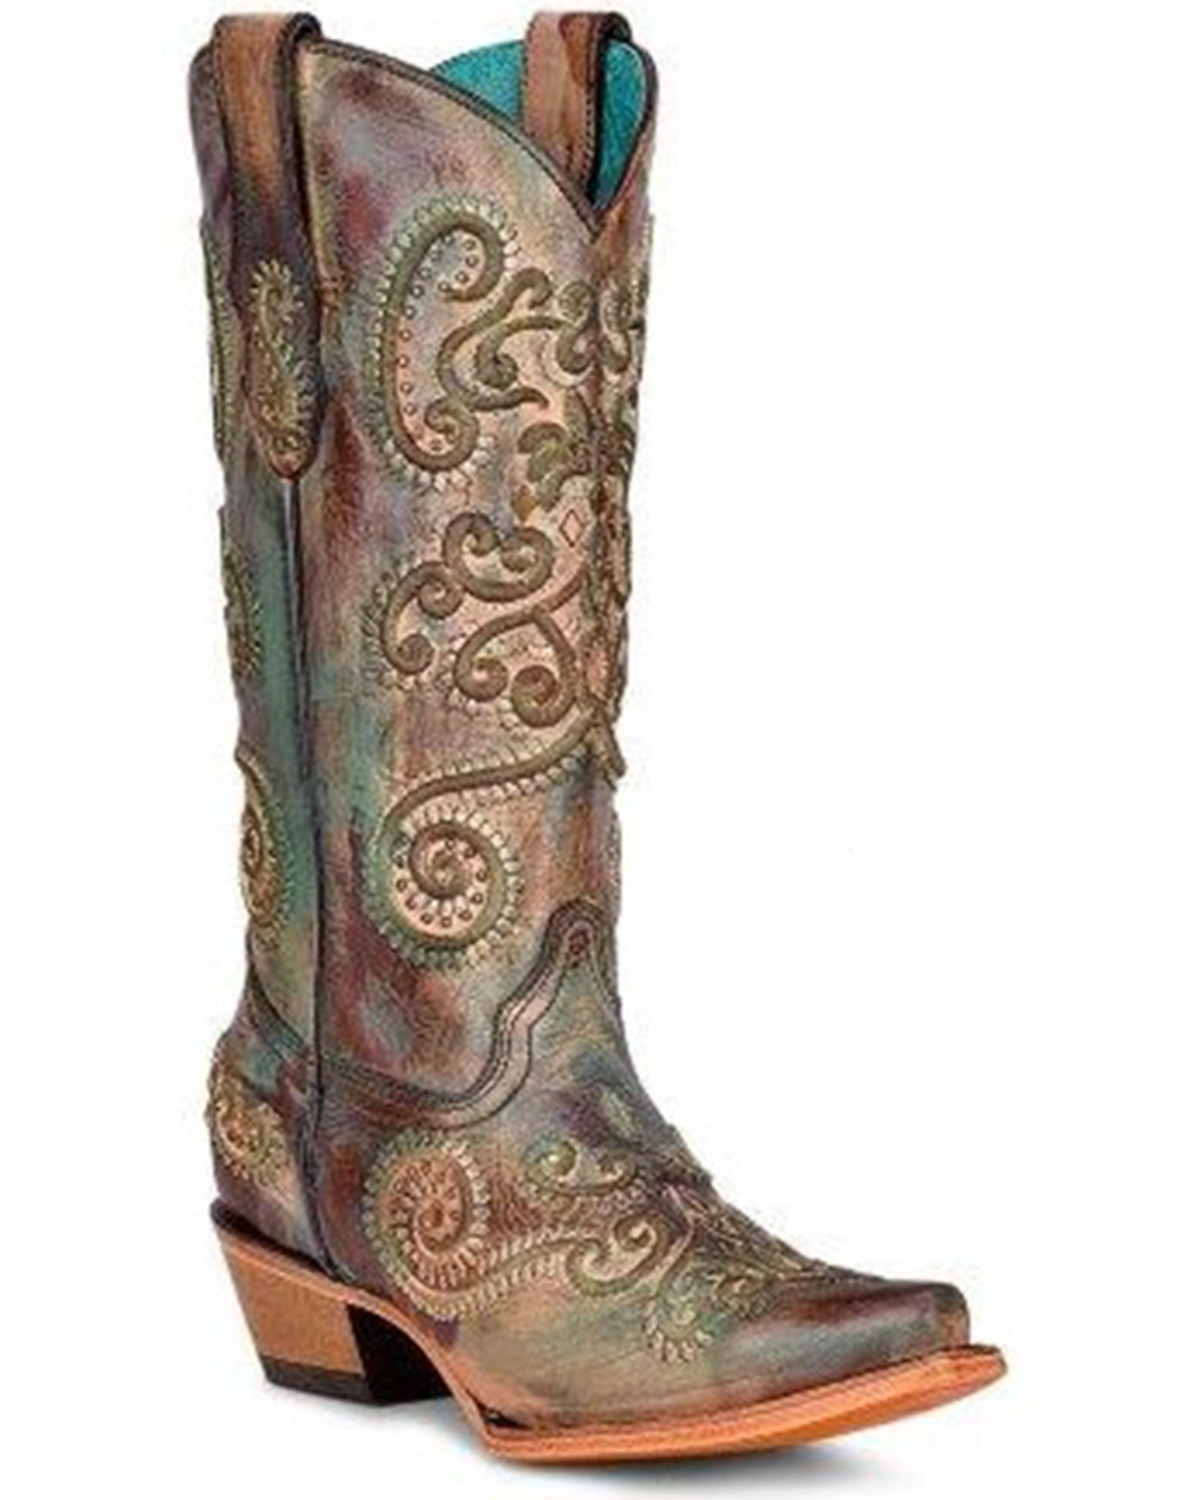 Corral Women's Embellished Western Boots - Snip Toe